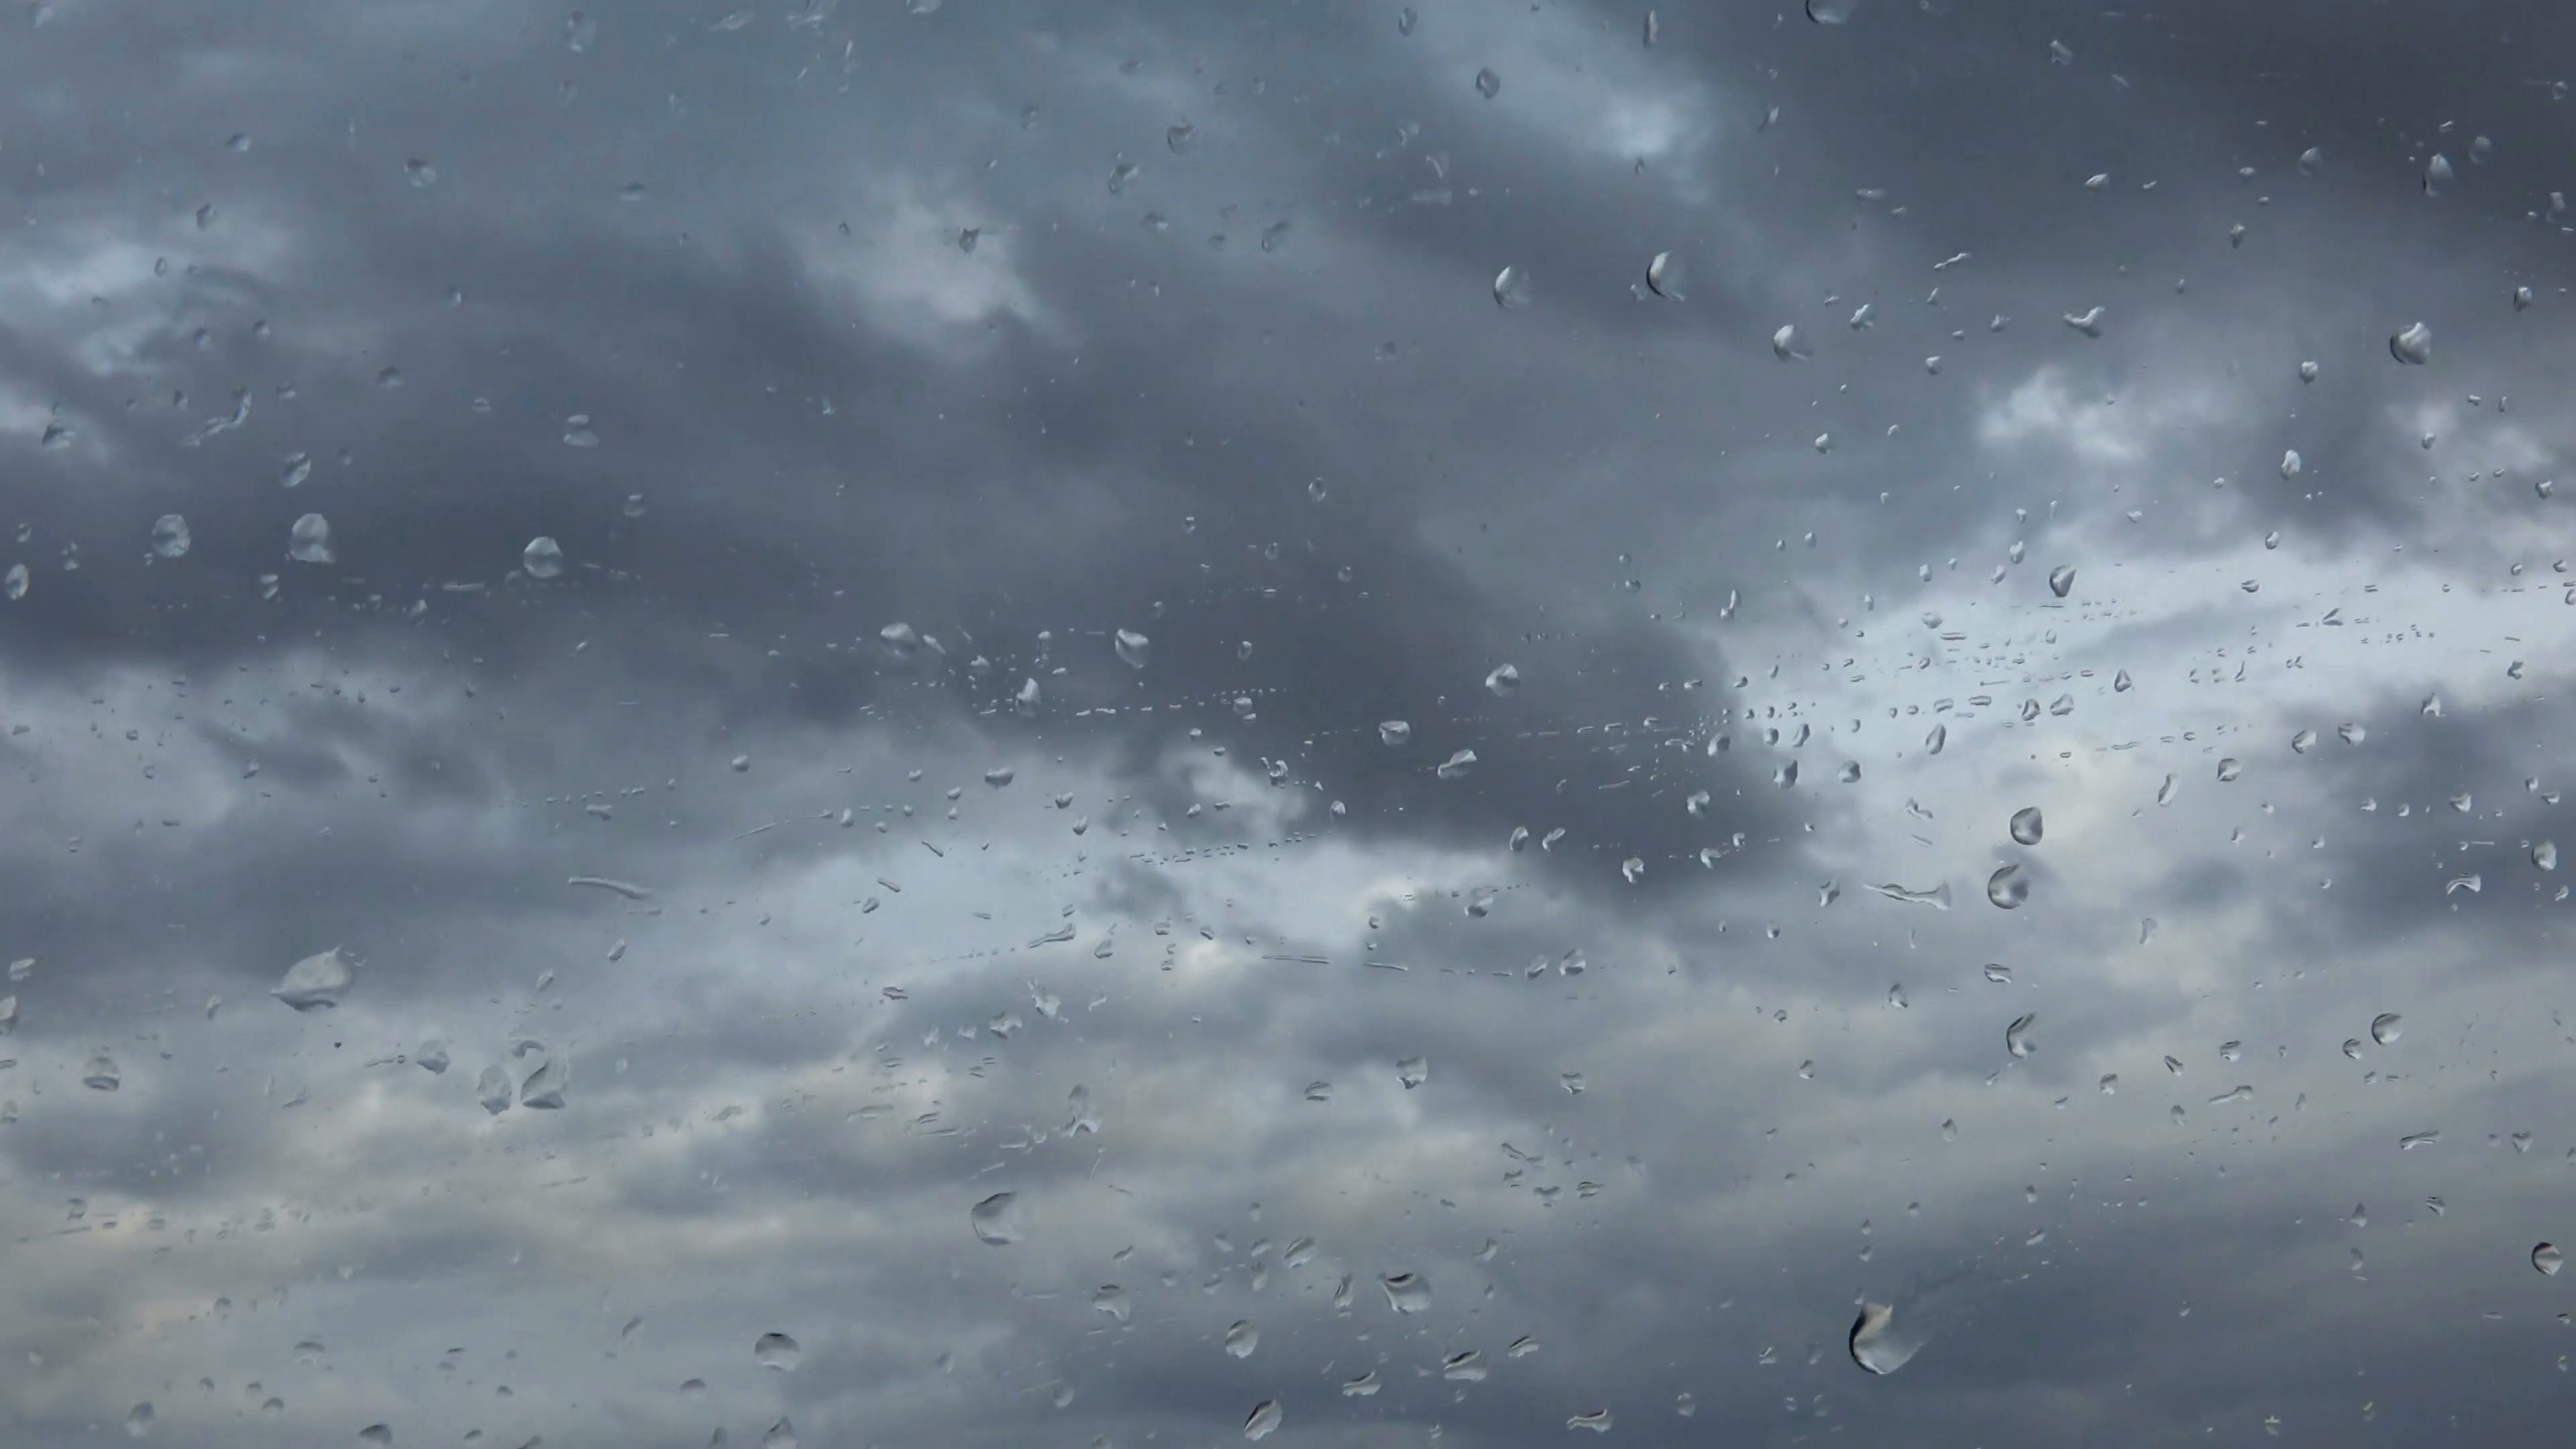 3840x2160 Rainy Days, Rain Drops on Window Pane of a Car in Motion, Bad Weather  Background. Stock Video Footage - VideoBlocks